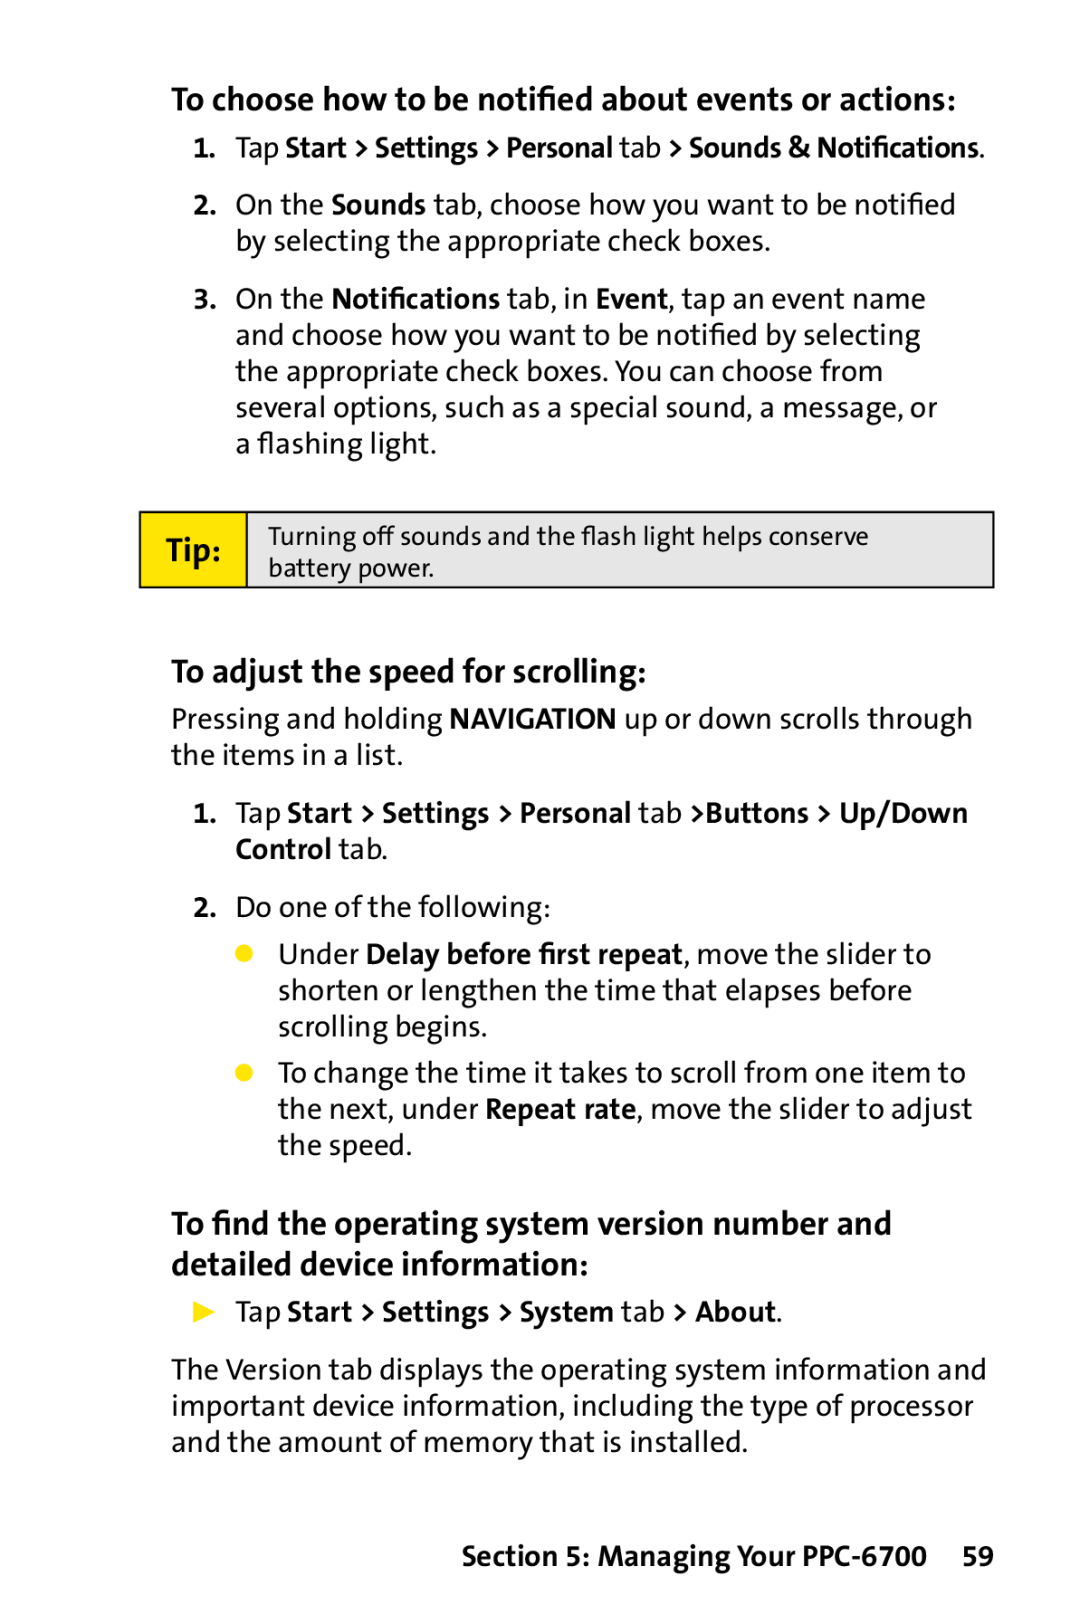 Sprint Nextel PPC-6700 manual To choose how to be notiﬁed about events or actions, To adjust the speed for scrolling 